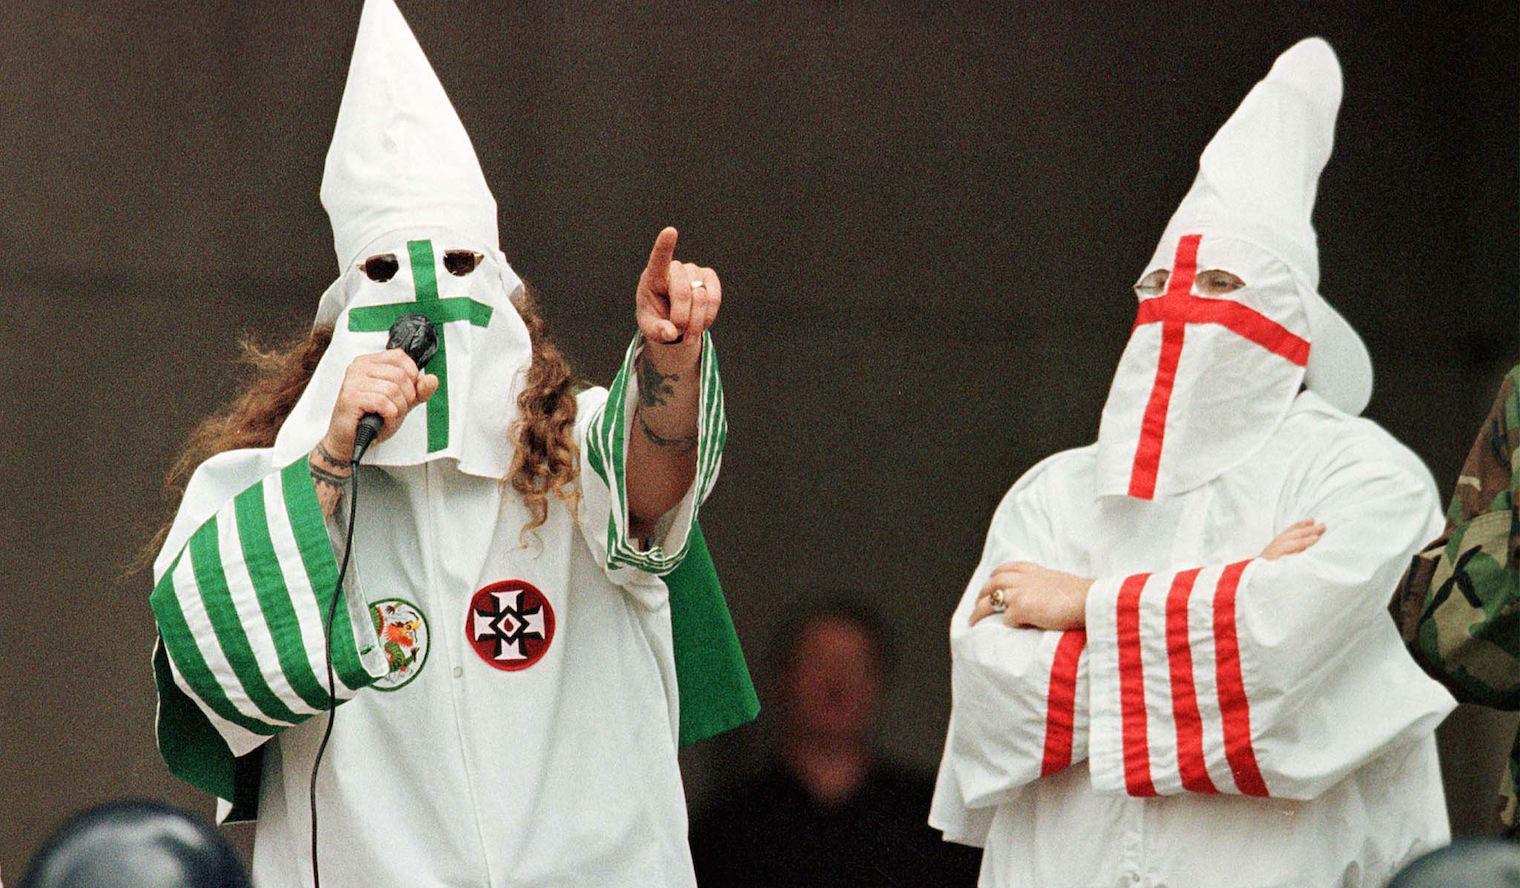 File: A KKK rally on 21 August 1999 in Cleveland, Ohio